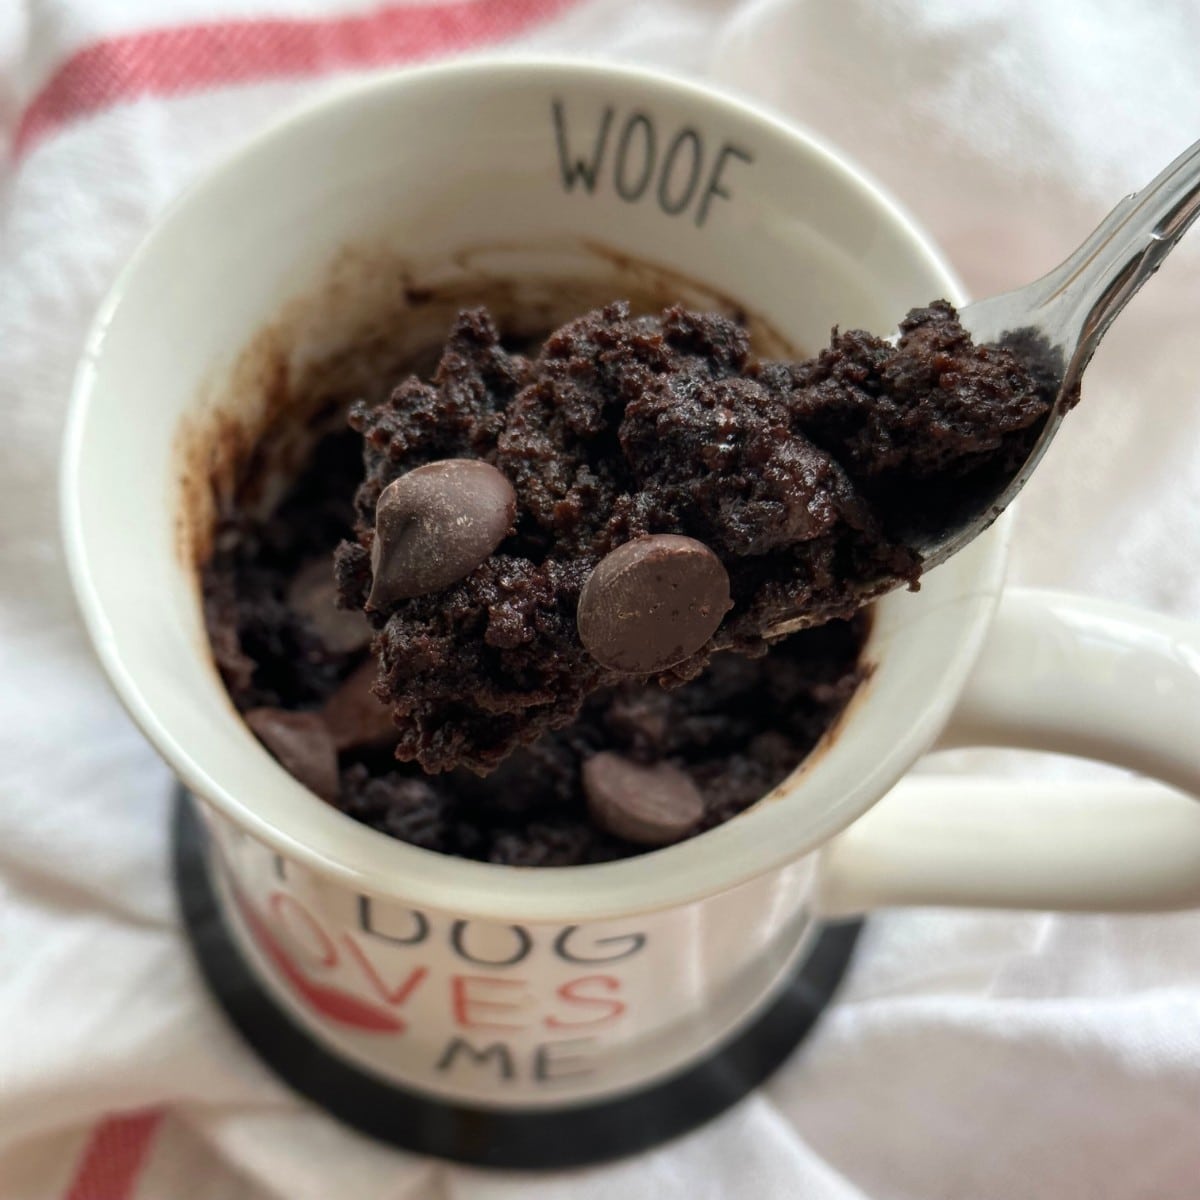 Bite of chocolate zucchini mug cake on fork lifted out of mug with more cake. White mug with text that reads "WOOF" on lip. On top of white cloth napkin with red stripes.